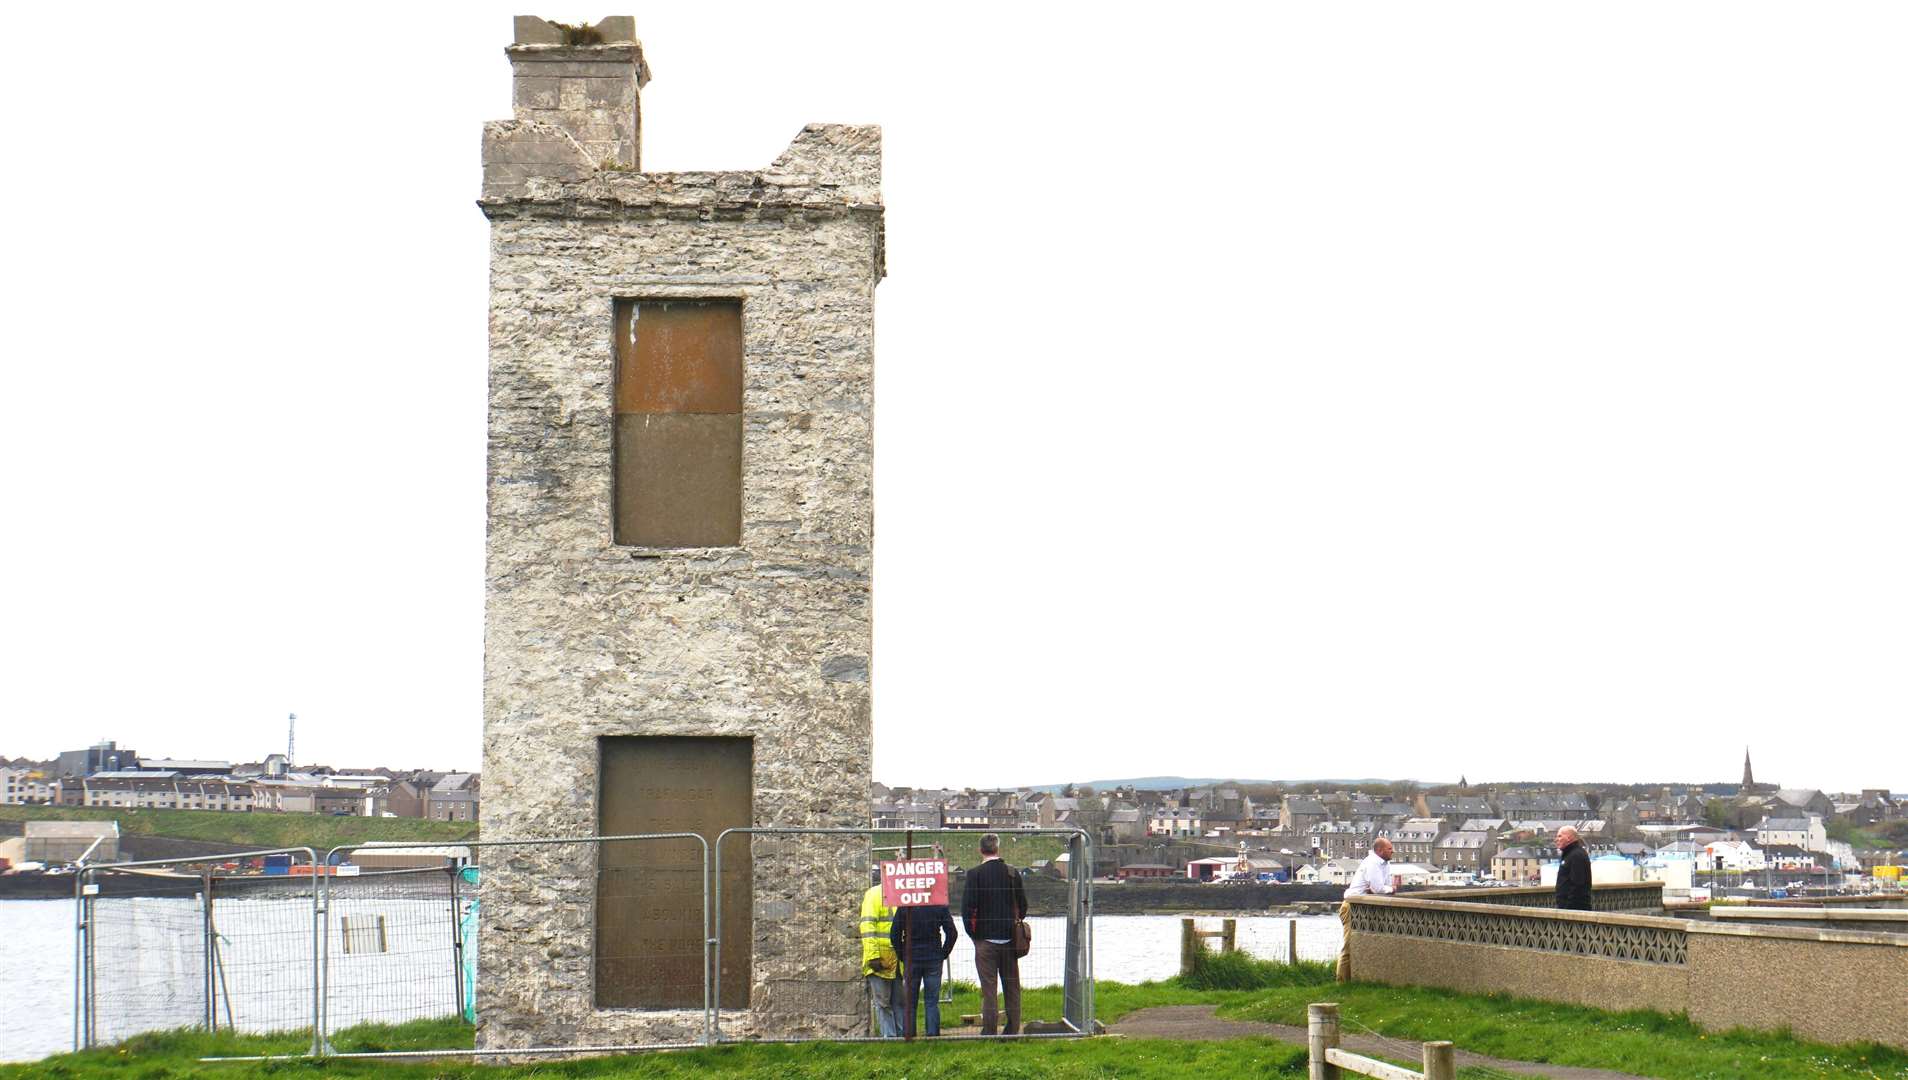 Funding is needed for work on the Soldiers' Tower at Wick.